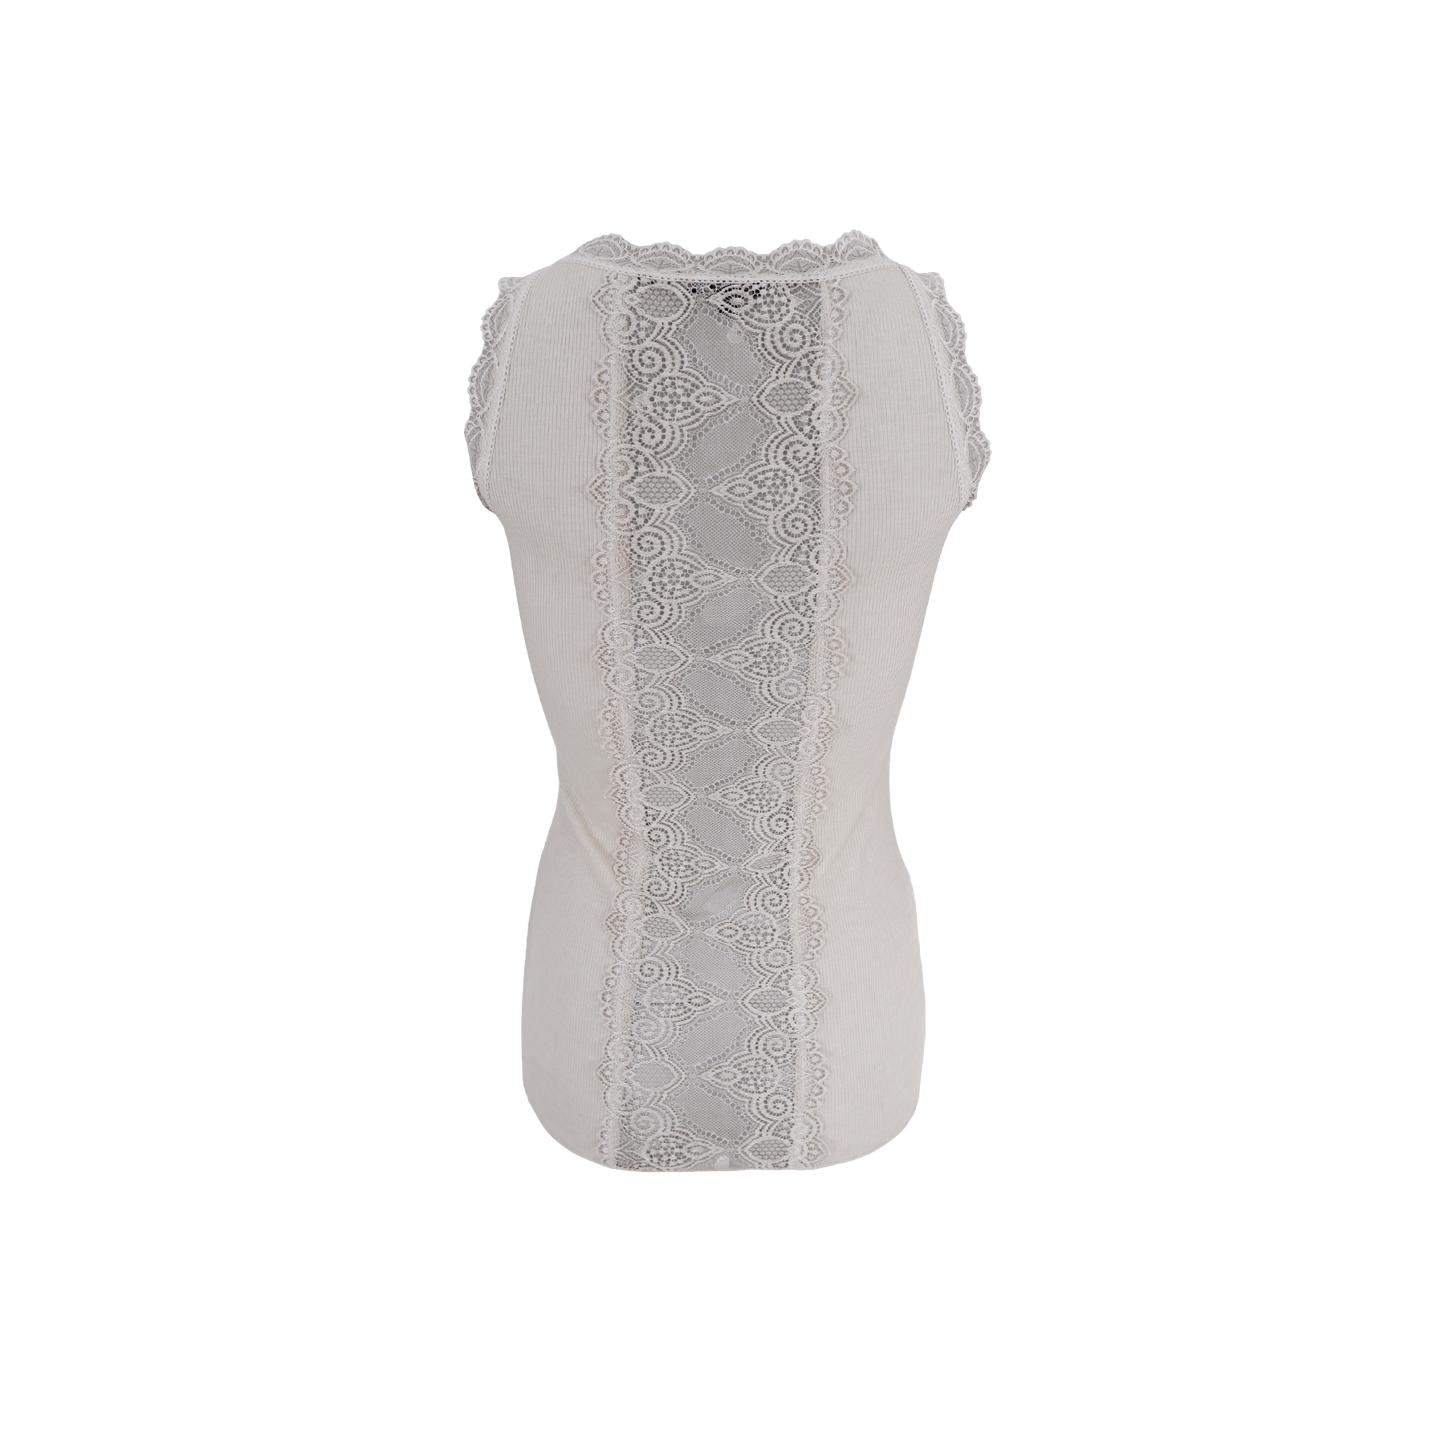 BCIVY Top Ivory